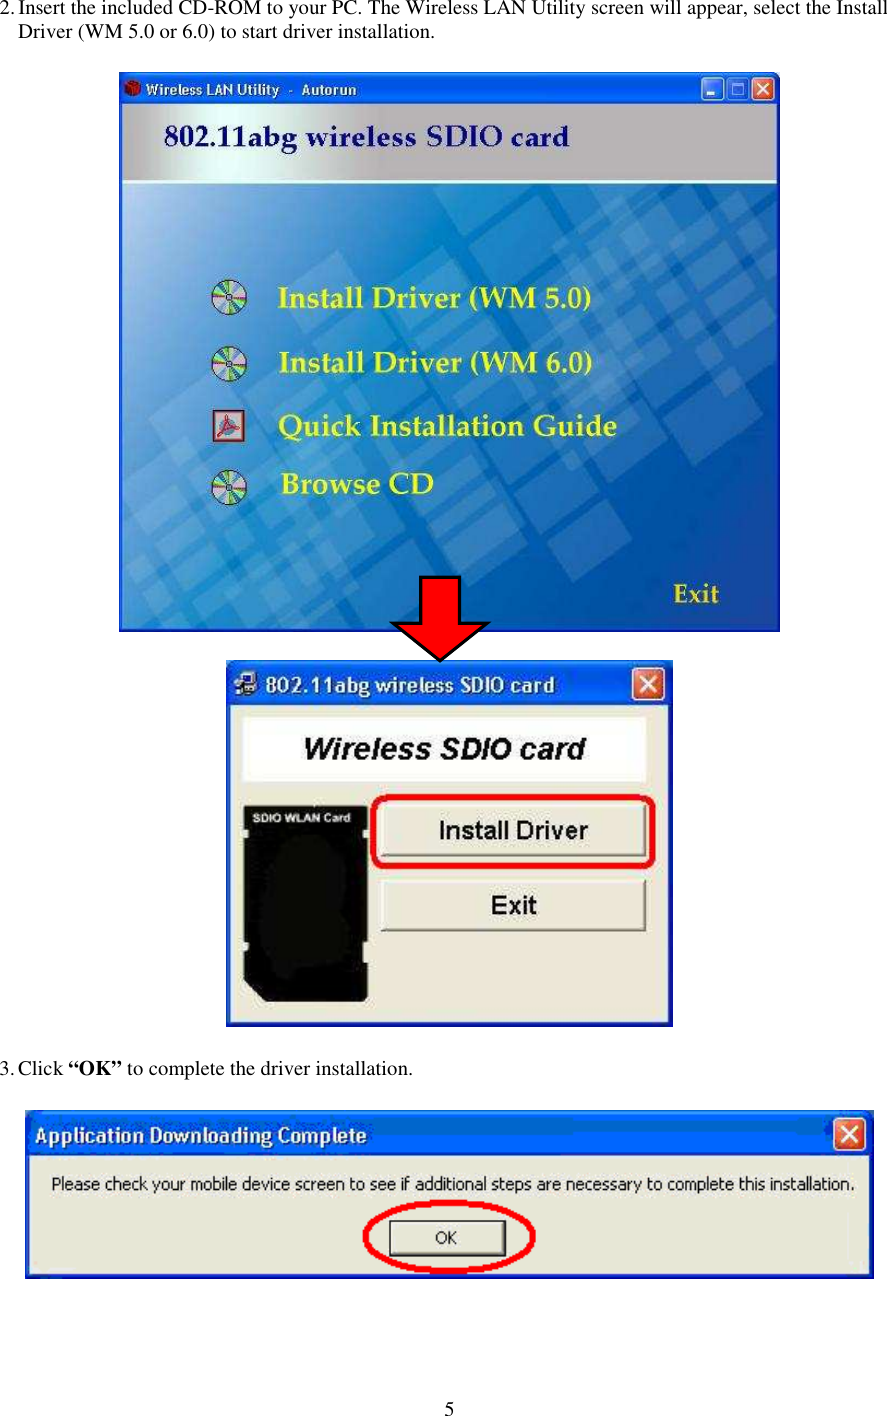   5 2. Insert the included CD-ROM to your PC. The Wireless LAN Utility screen will appear, select the Install Driver (WM 5.0 or 6.0) to start driver installation.   3. Click “OK” to complete the driver installation. 